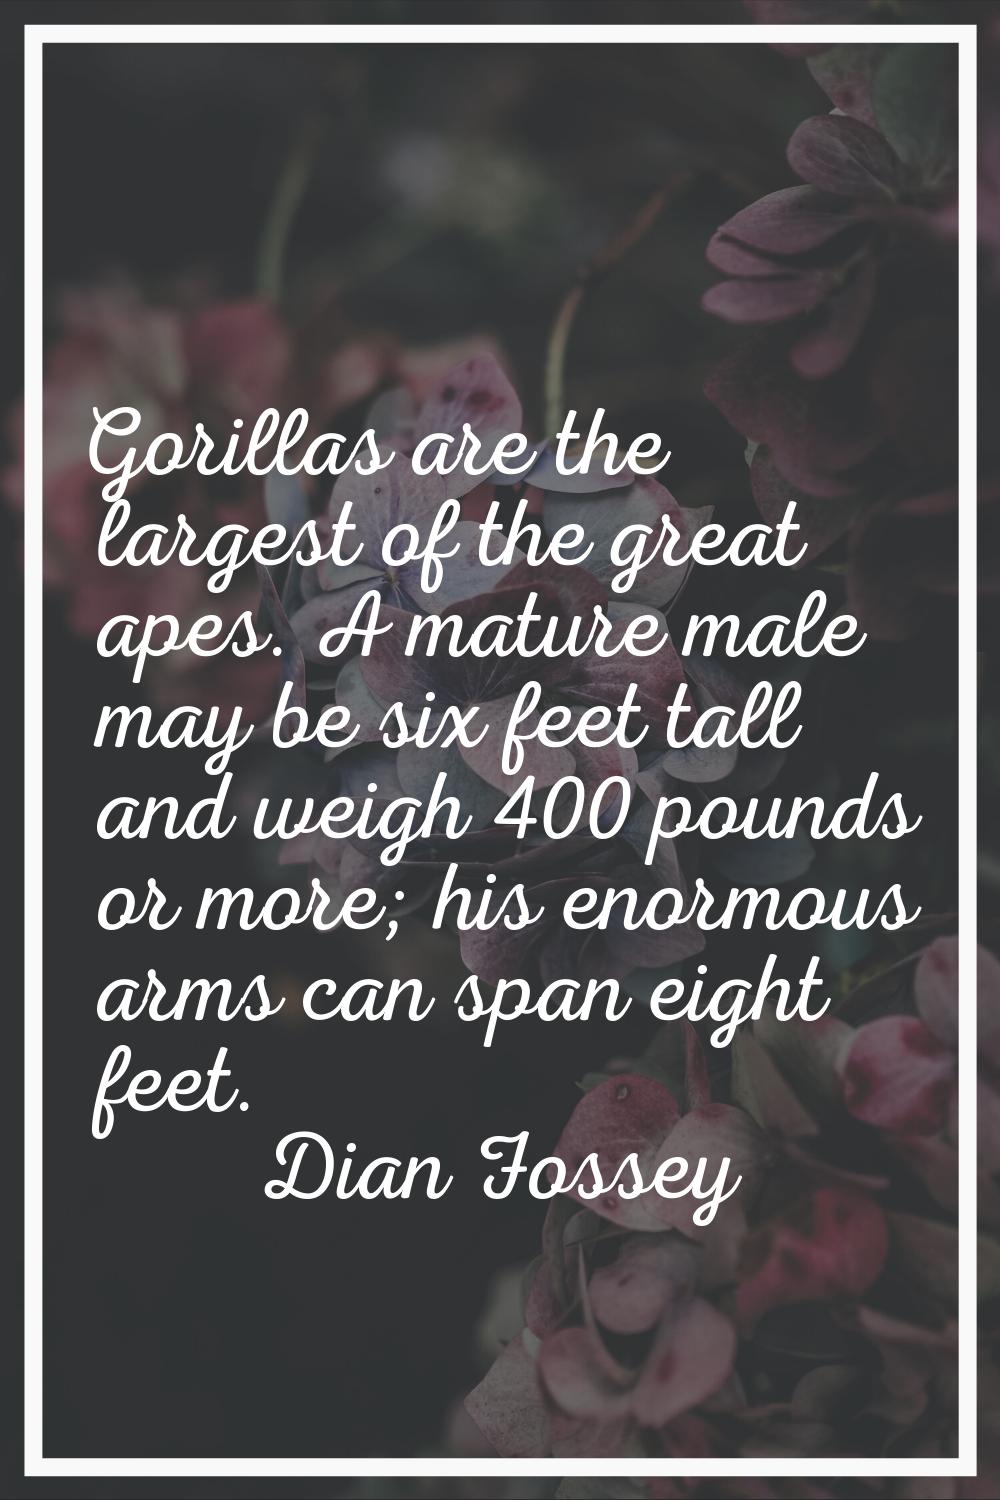 Gorillas are the largest of the great apes. A mature male may be six feet tall and weigh 400 pounds